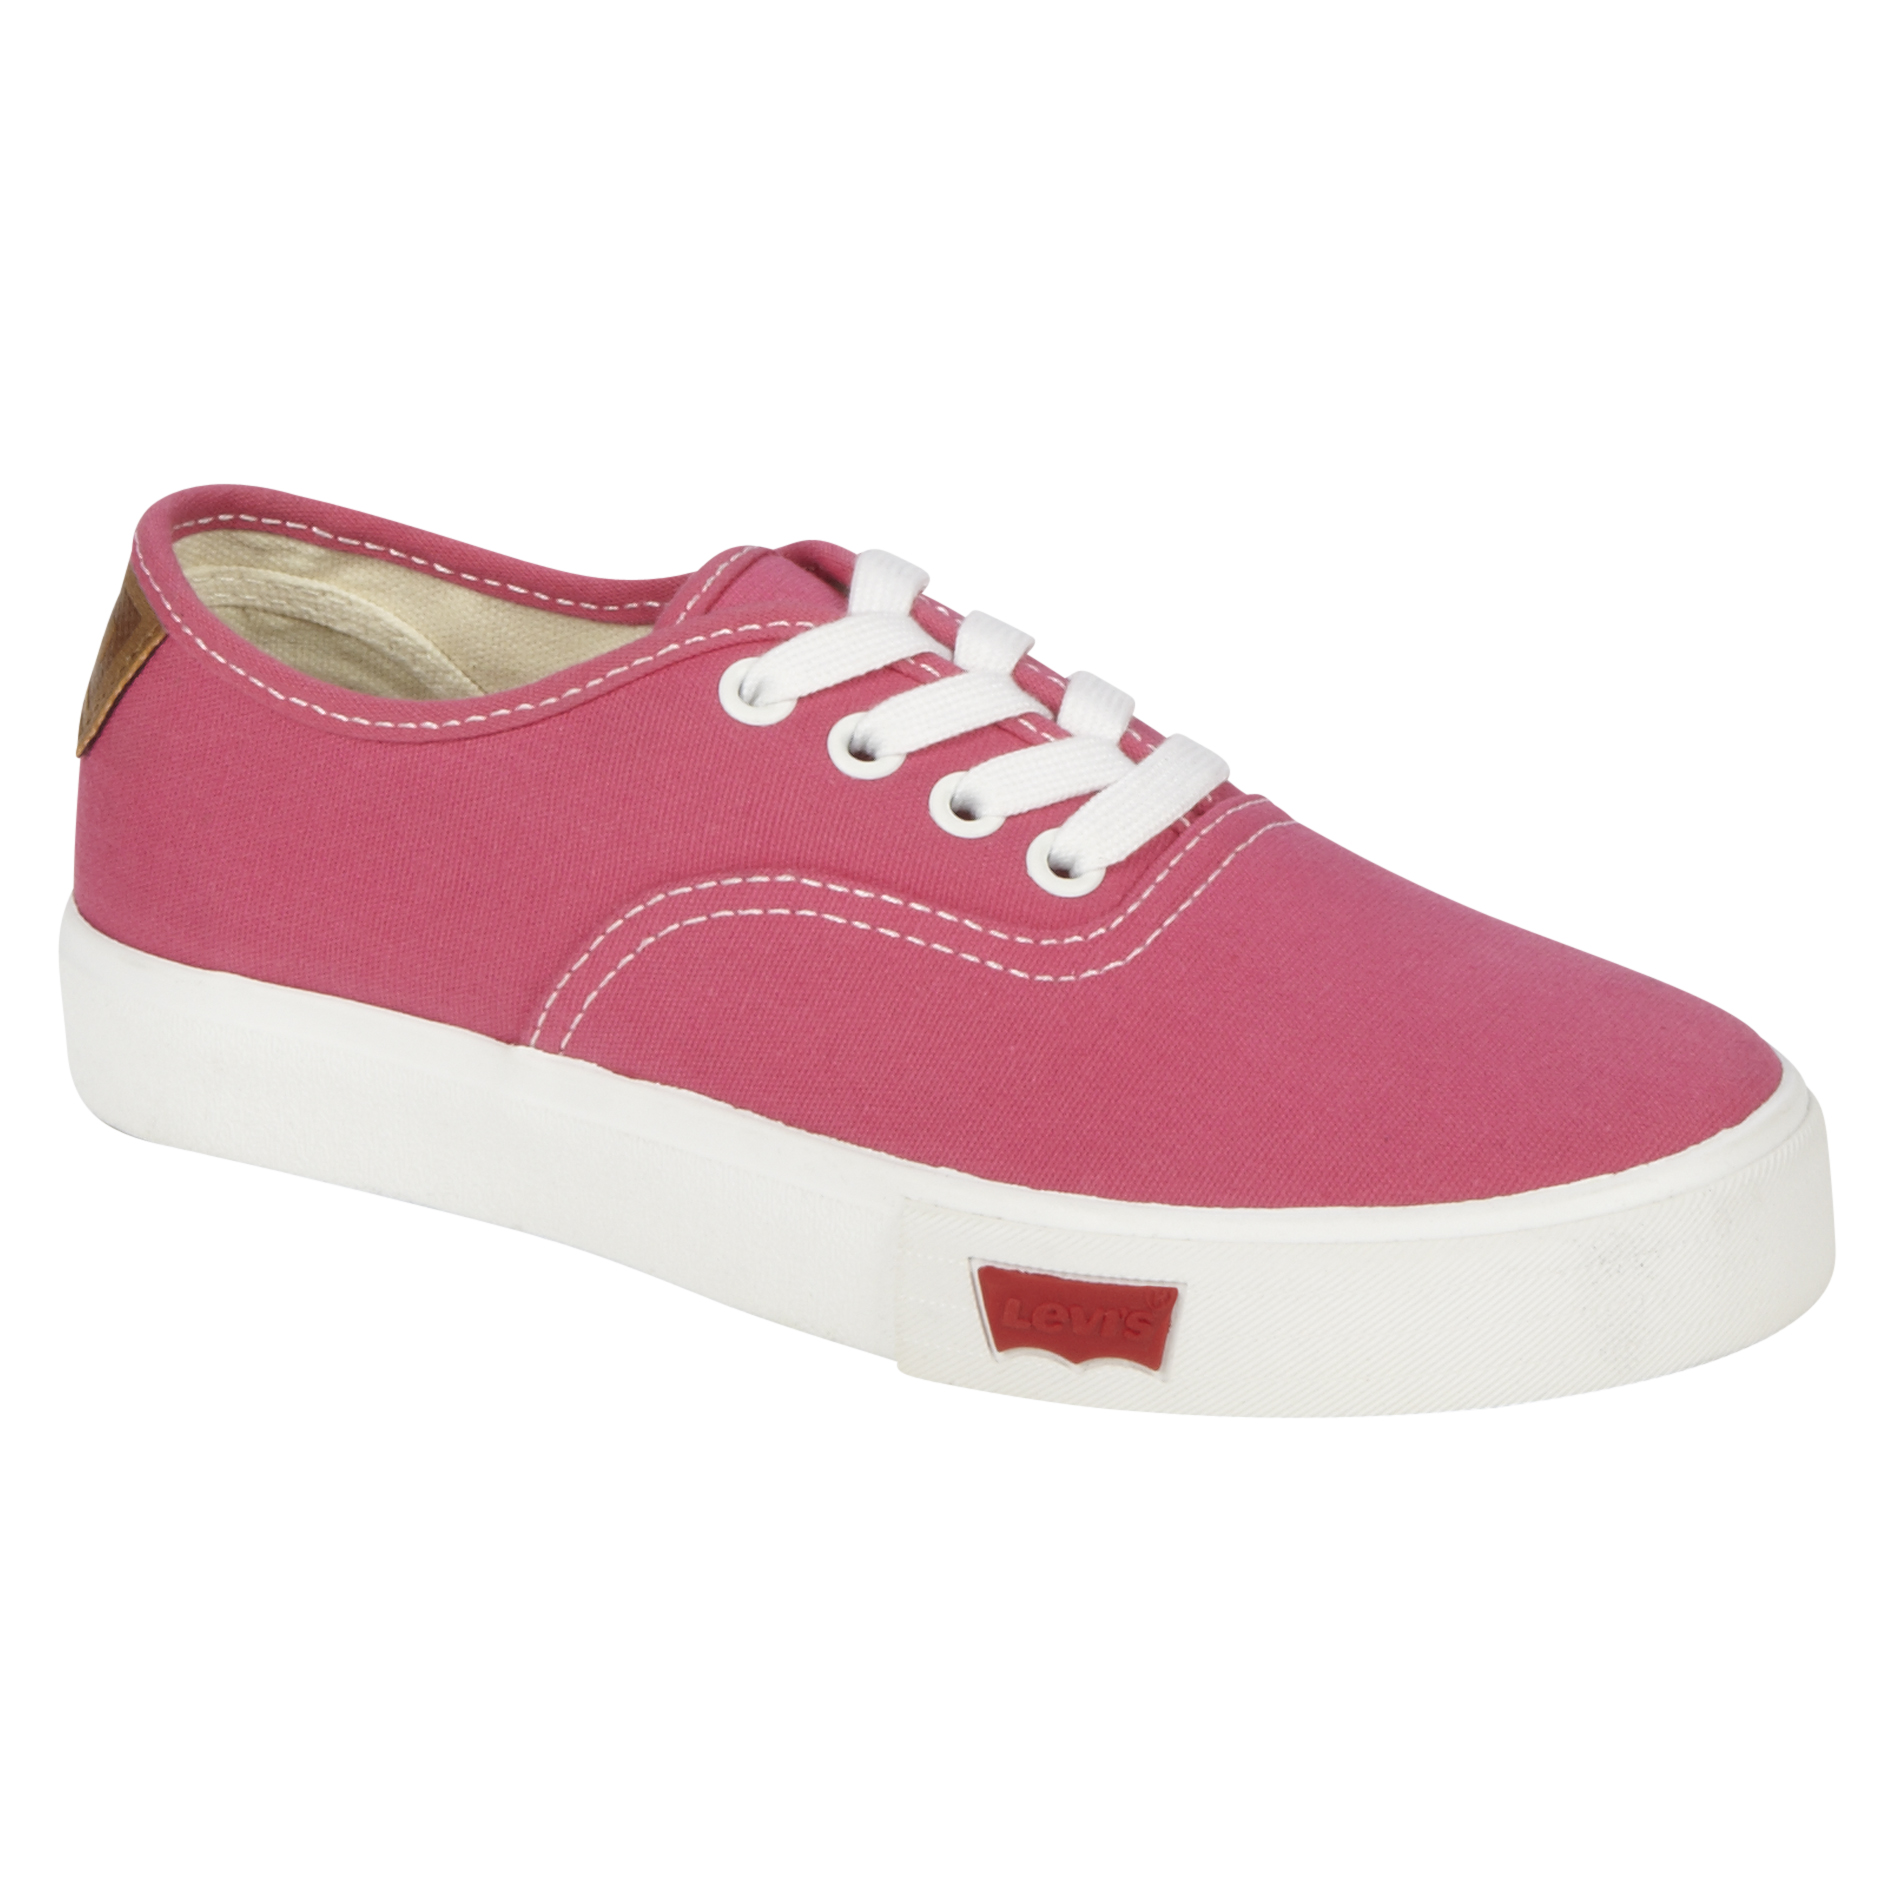 Levi's Women's Rula Pink Casual Oxford Shoes